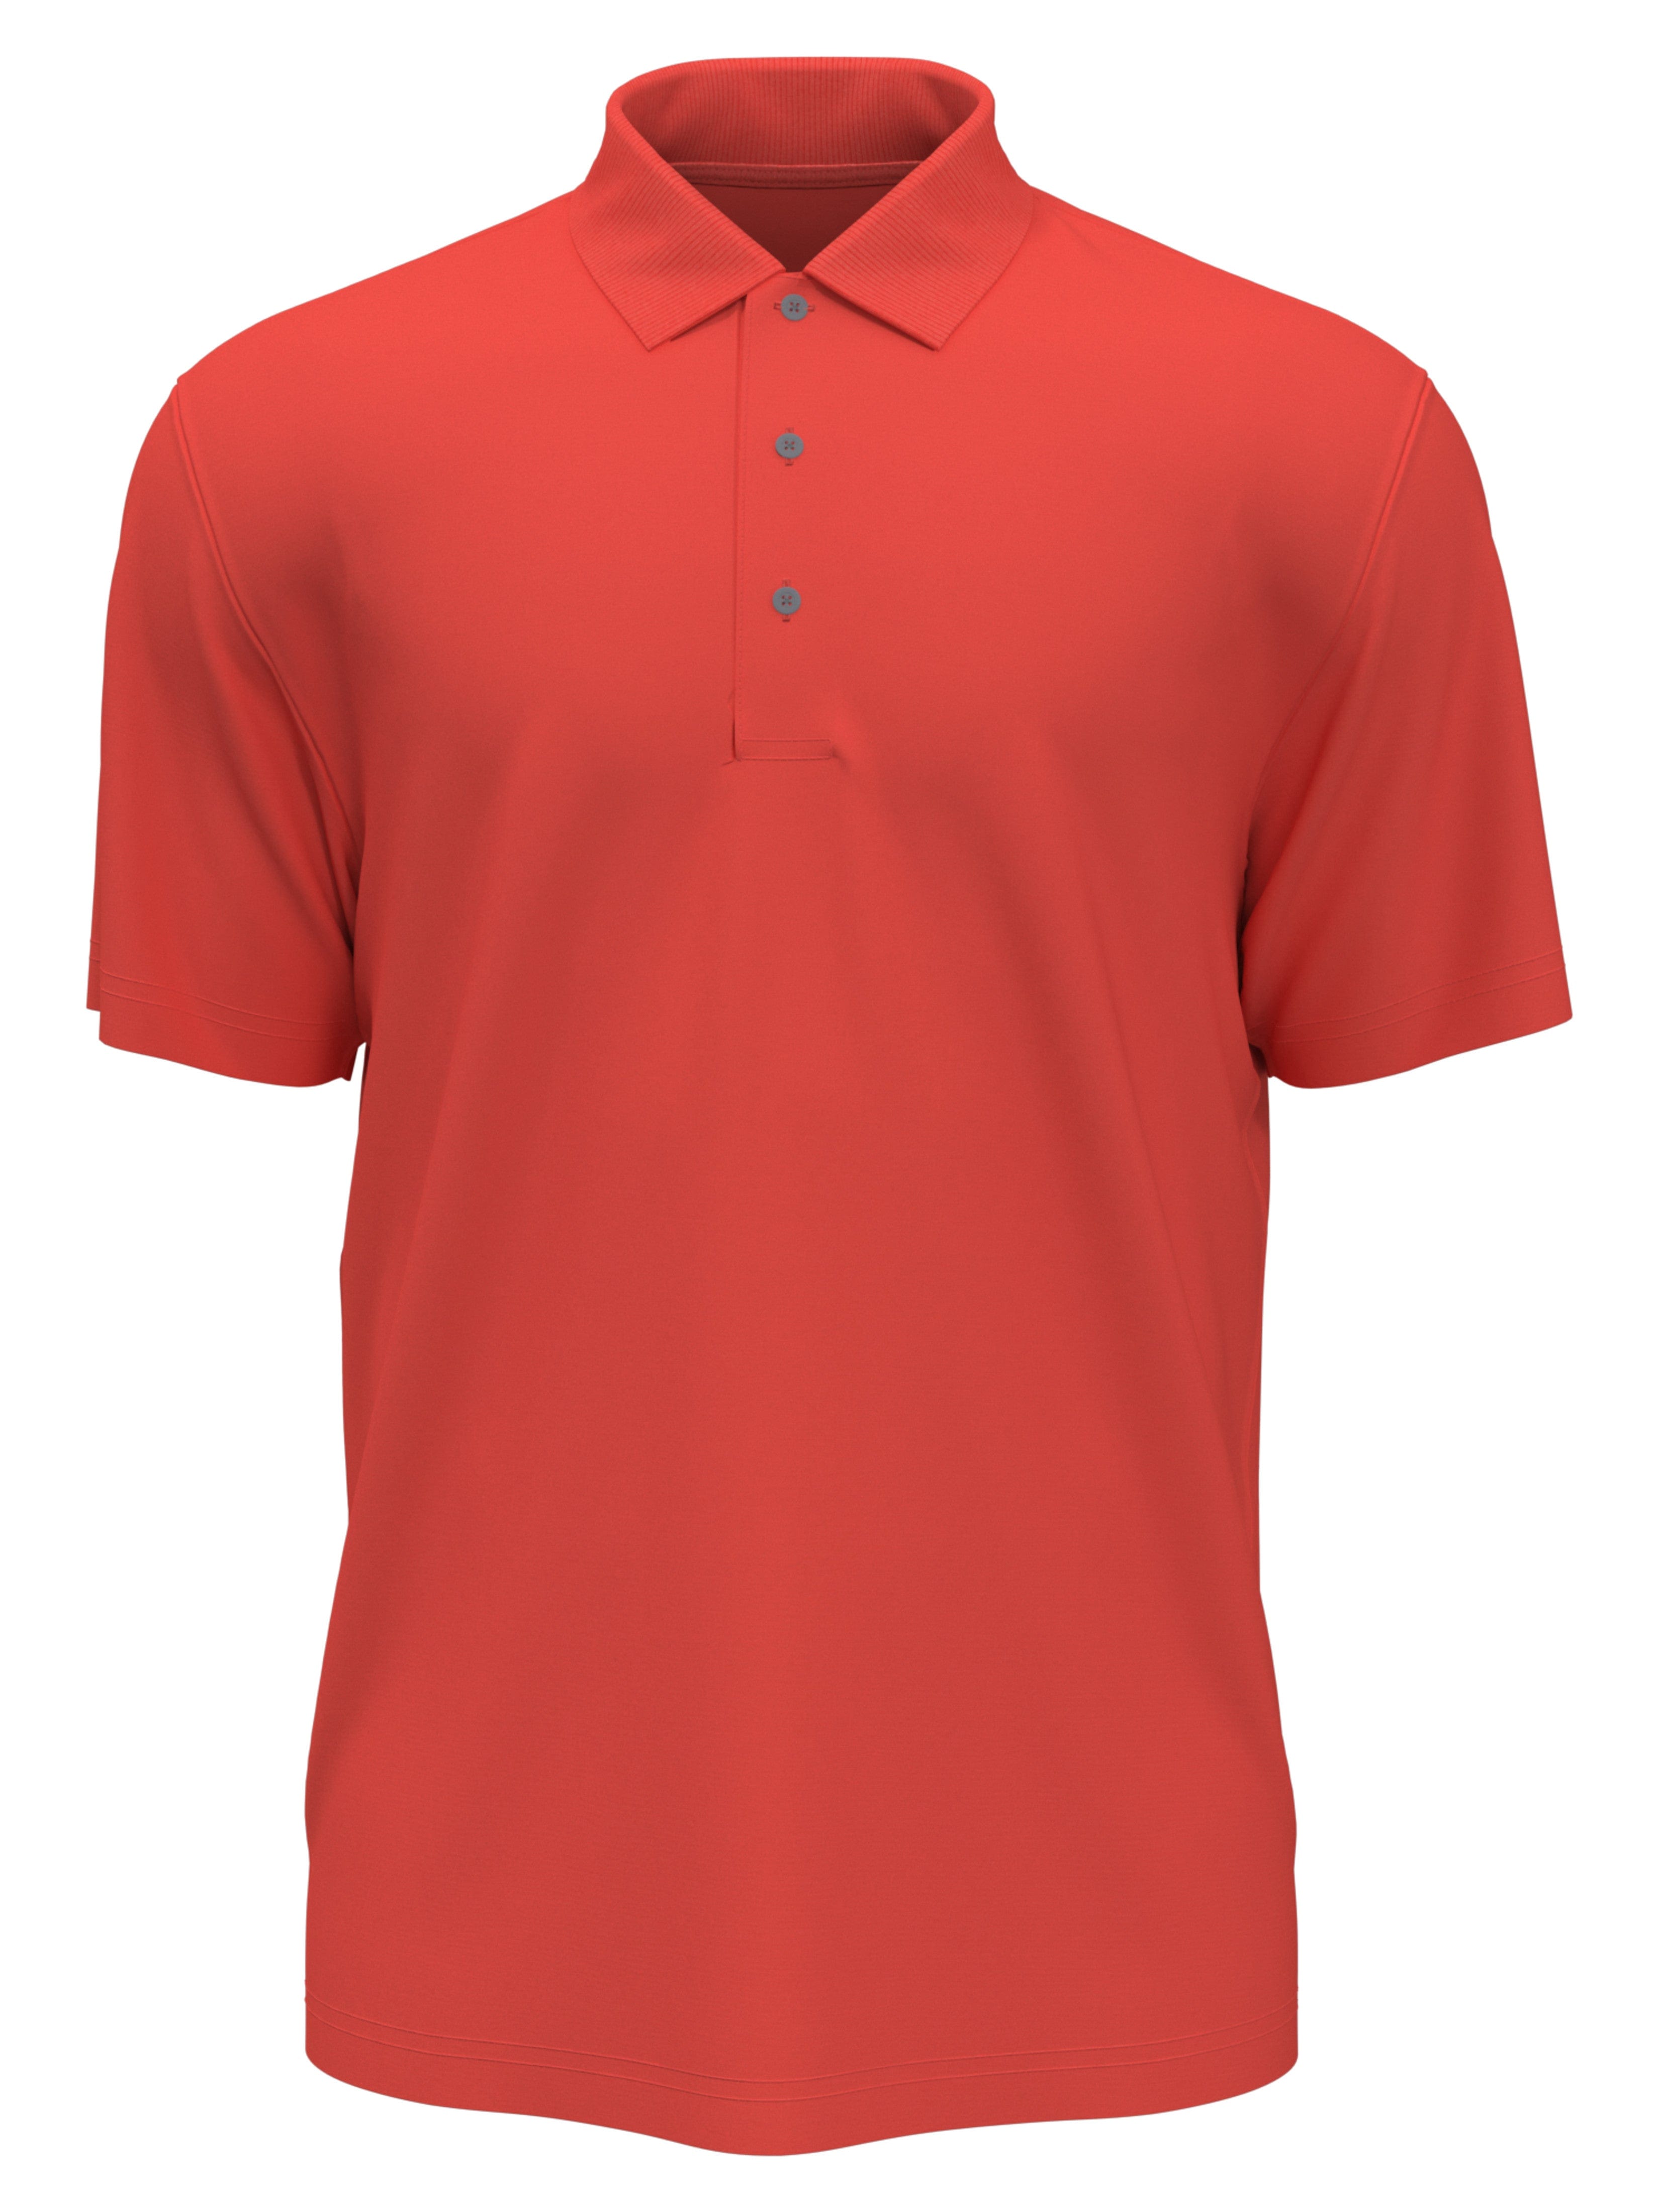 PGA TOUR Apparel Boys AirFlux™ Solid Mesh Golf Polo Shirt, Size Large, Firelight Red, 100% Polyester | Golf Apparel Shop